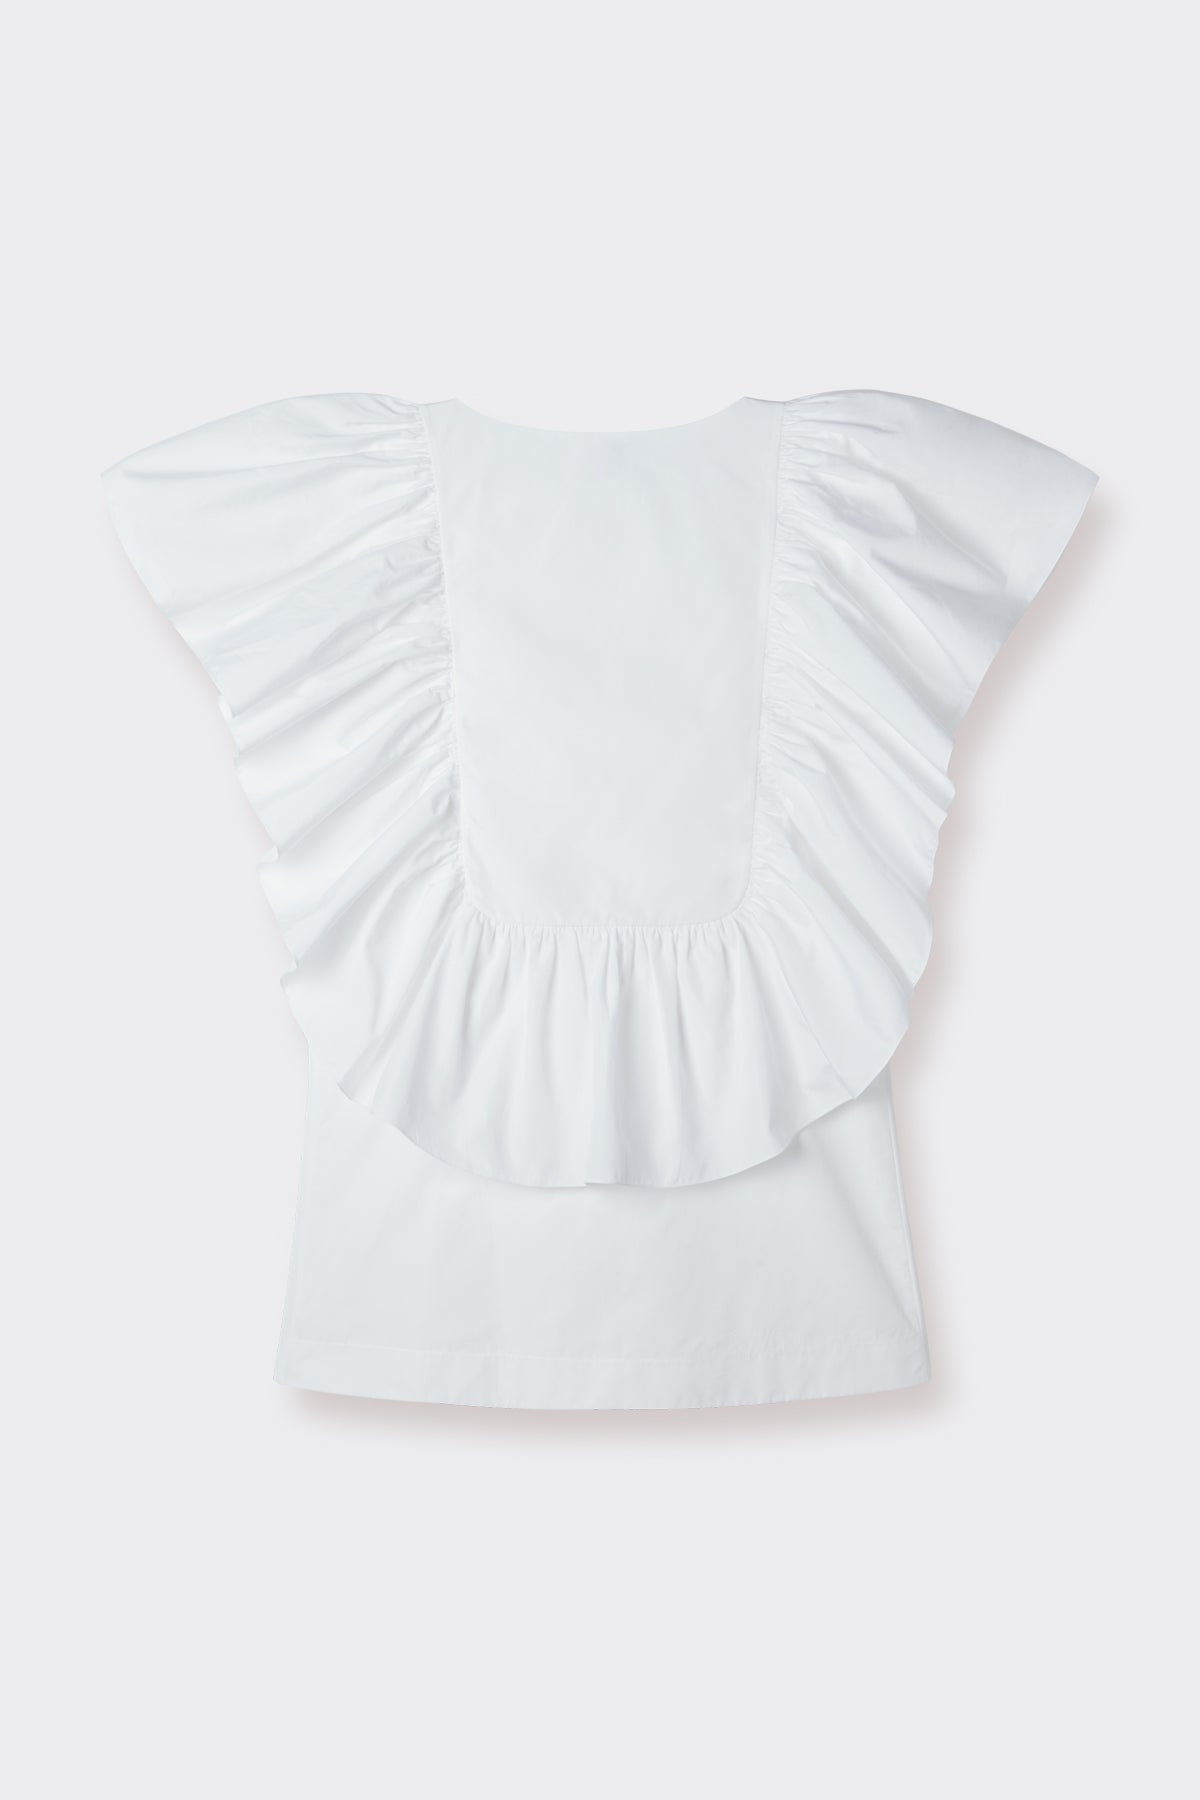 Charlize Dress in White| Noon by Noor